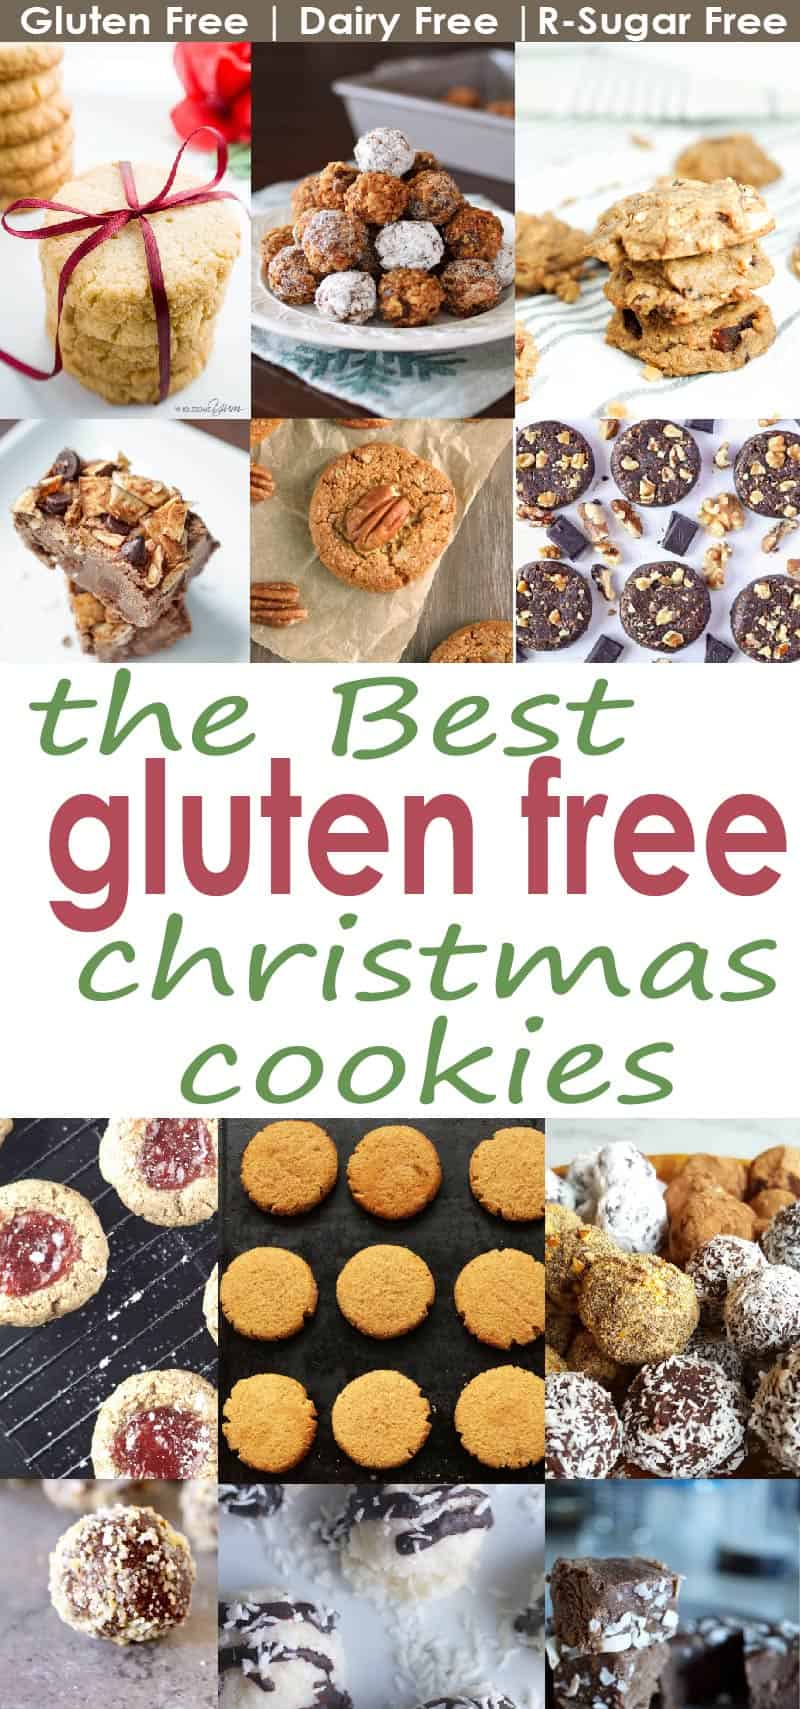 Being gluten free doesn't mean you have to go without this holiday season. These delicious gluten free cookies that will rival the gluten-filled versions.